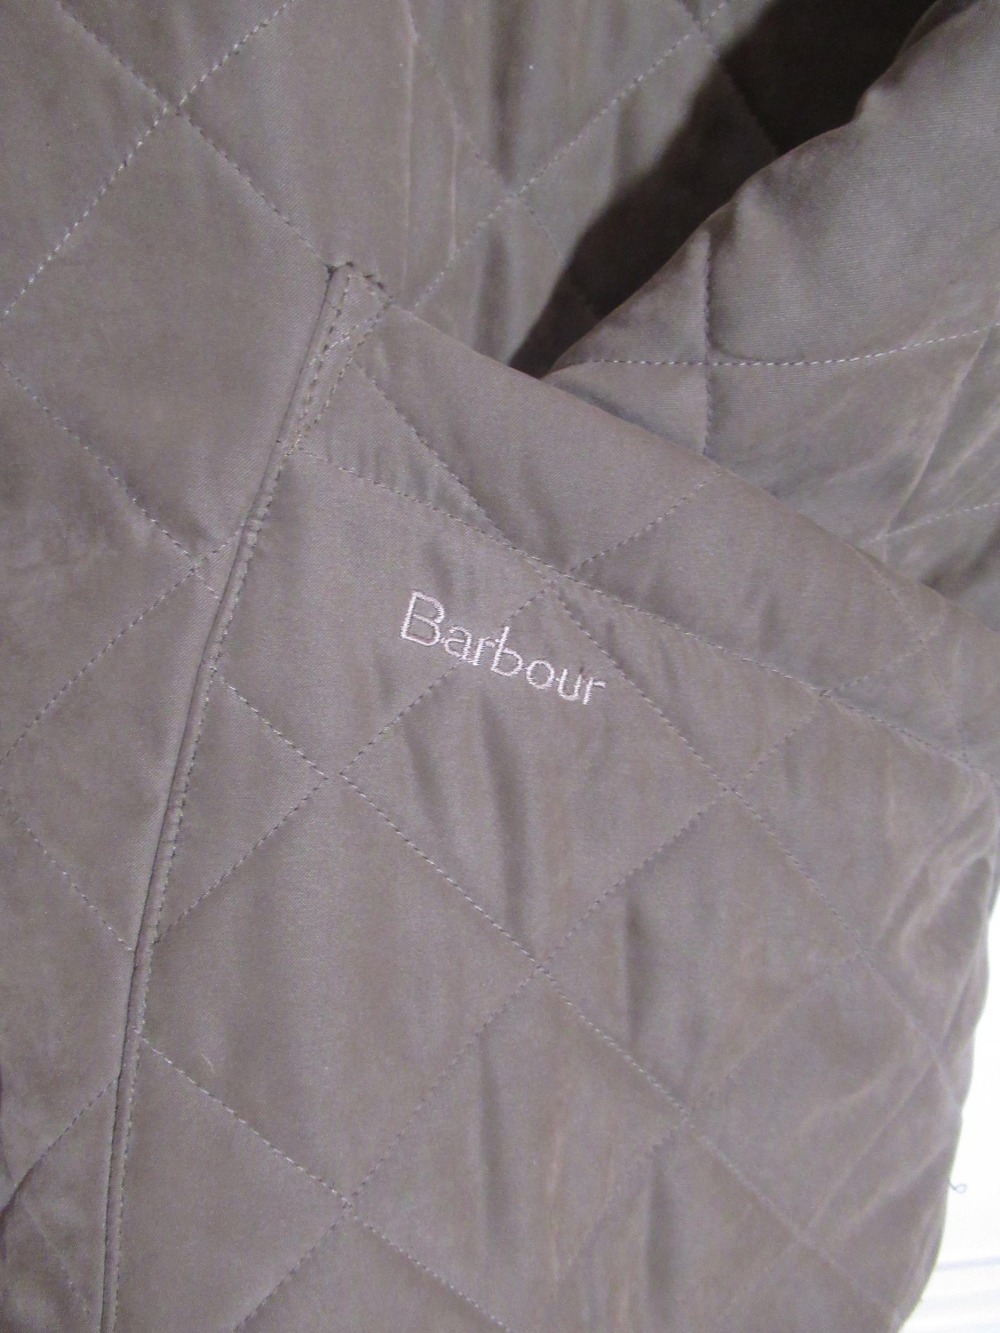 Barbour quilted green jacket, size M - Image 2 of 3